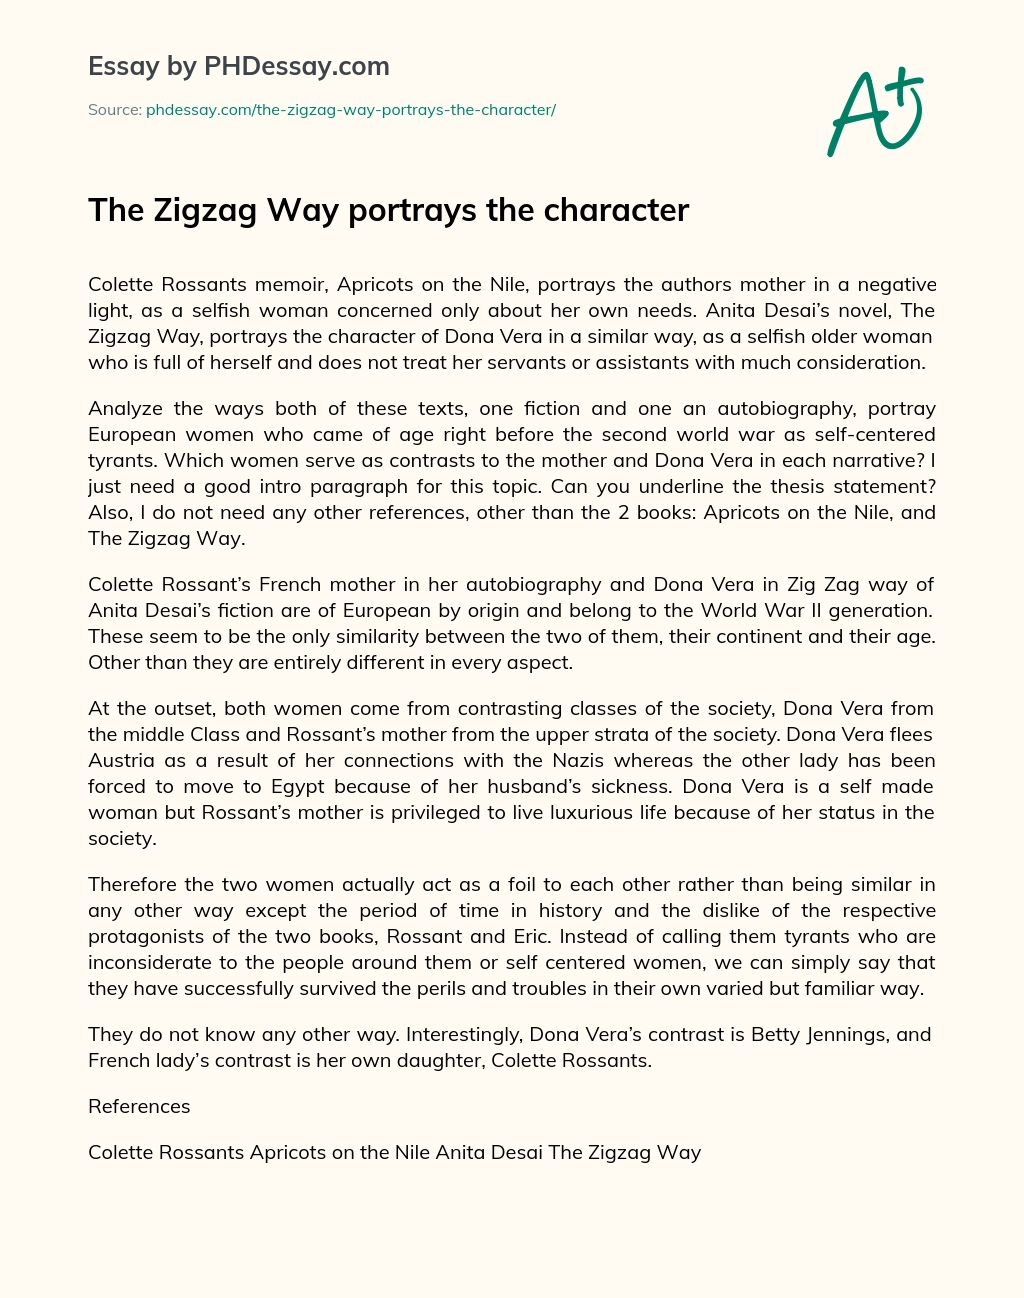 The Zigzag Way portrays the character essay